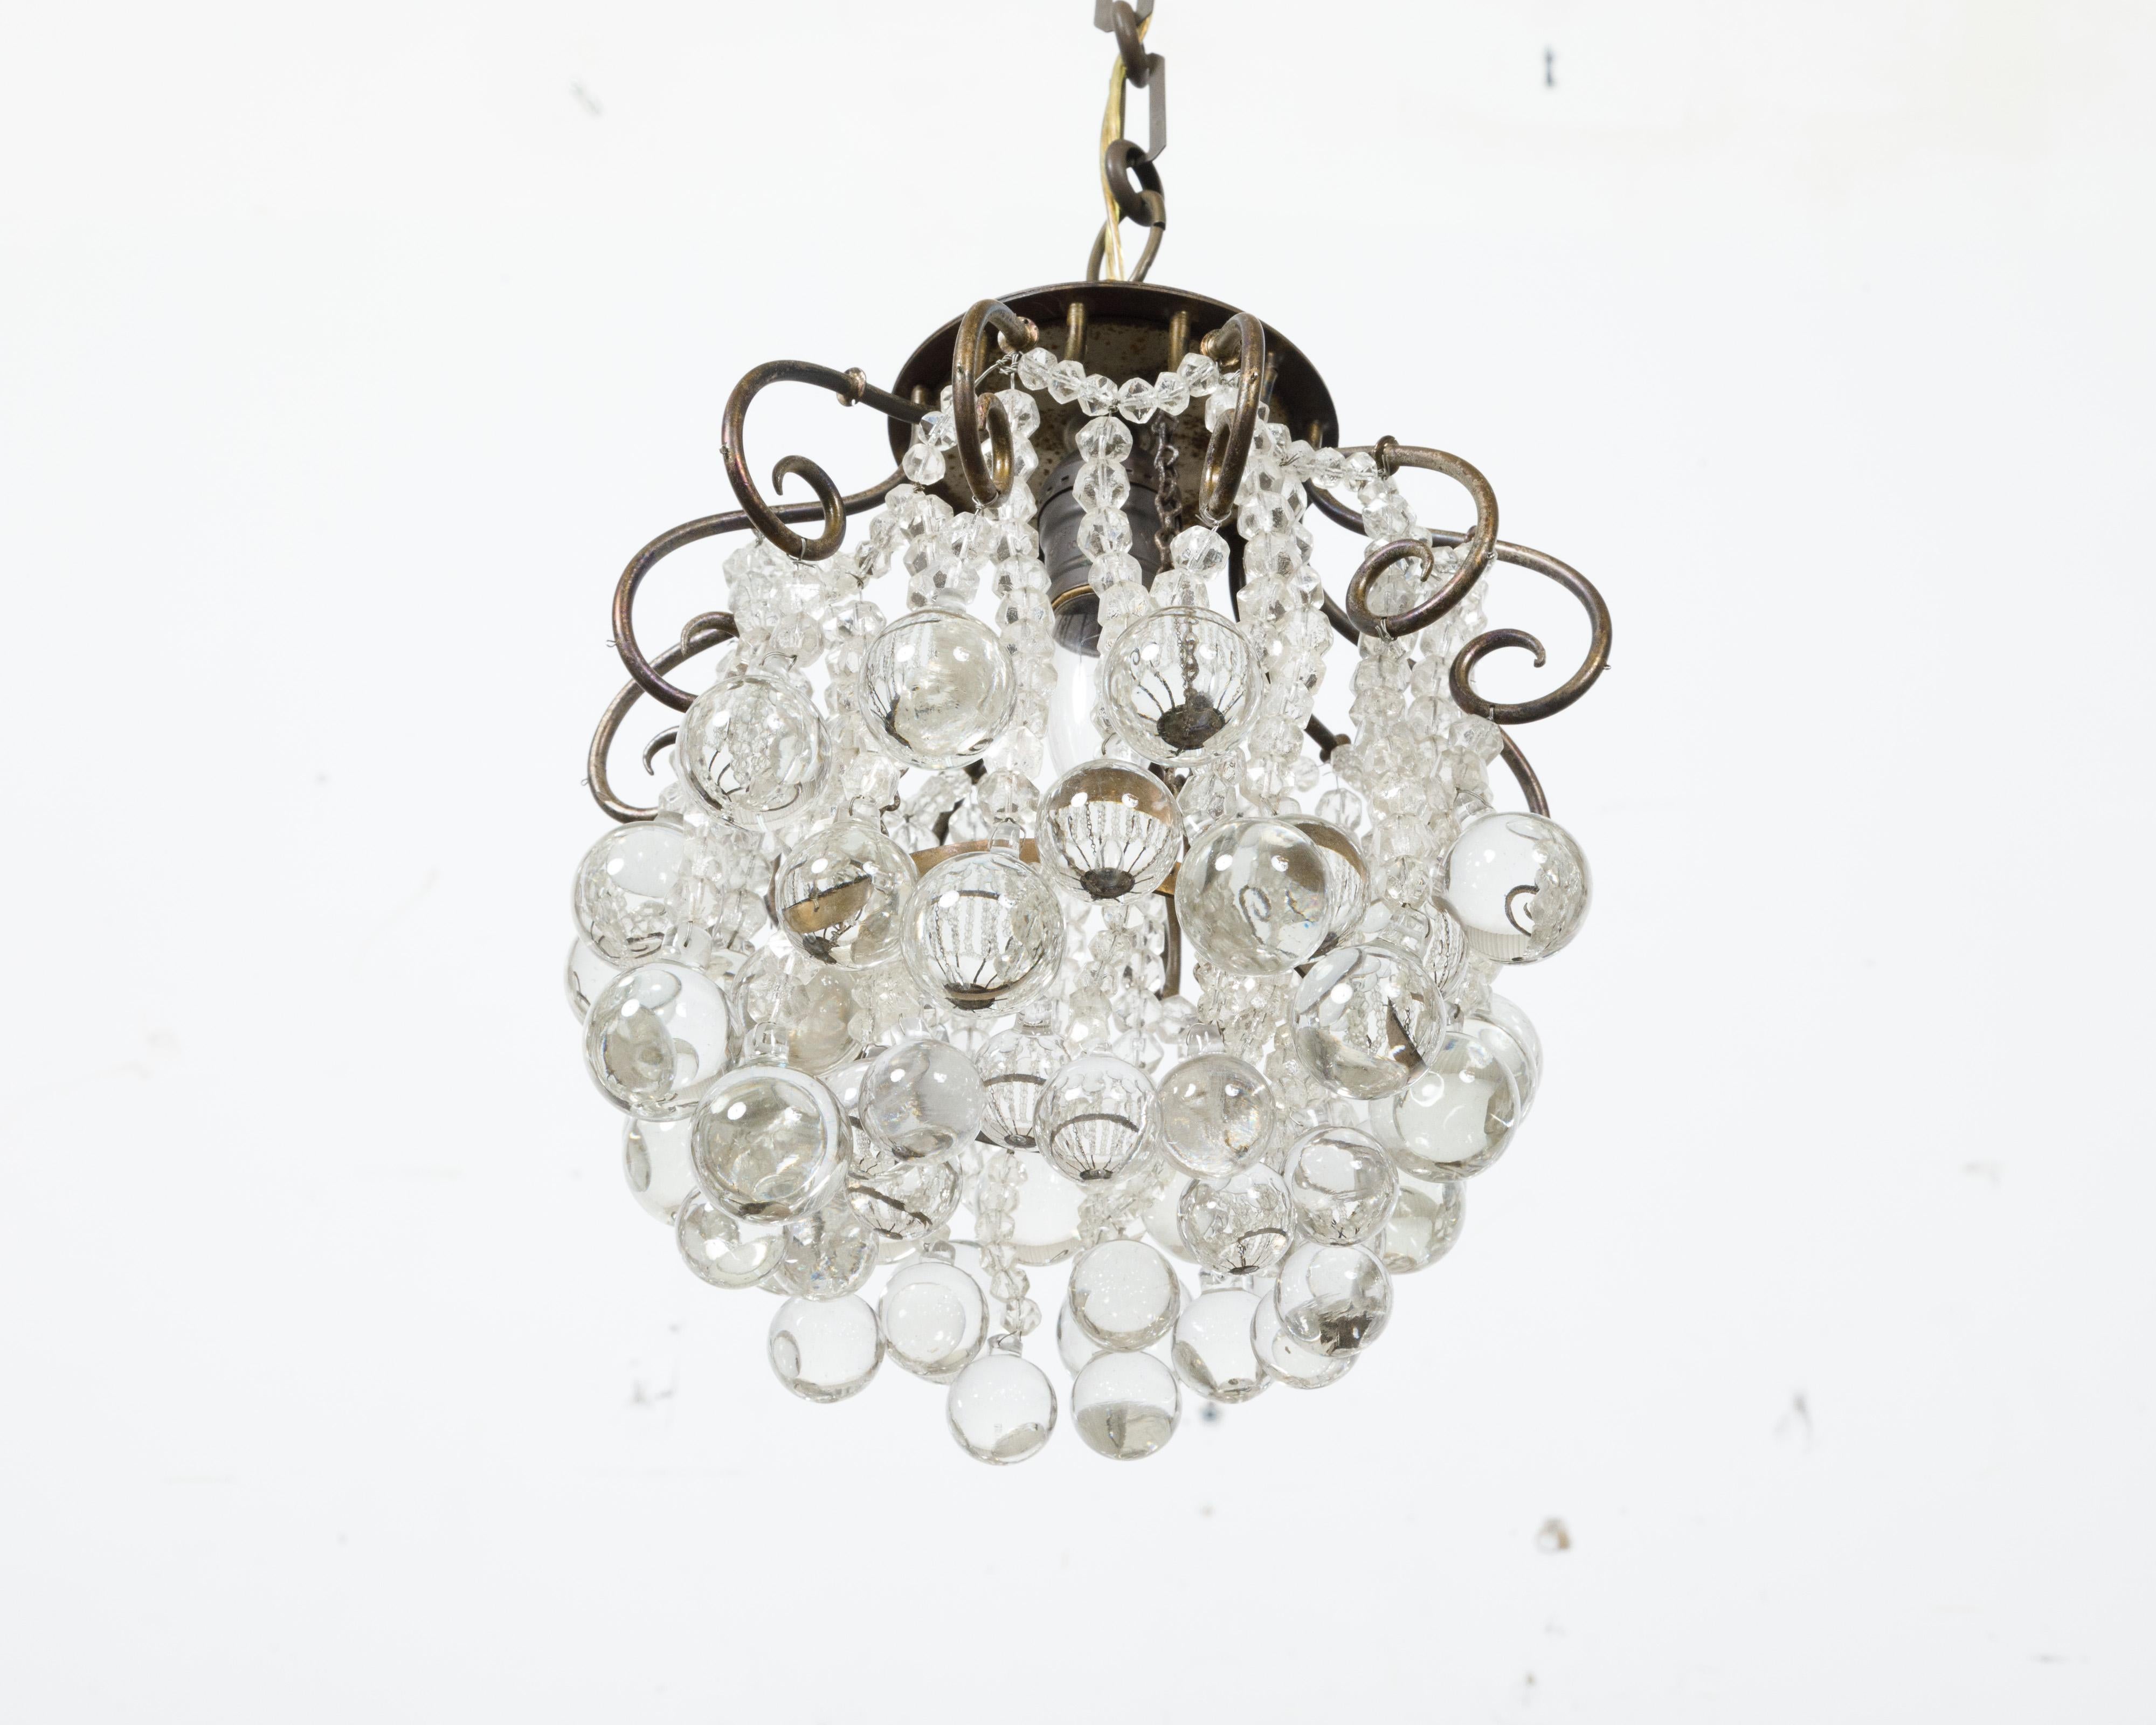 1920s French Crystal Chandelier with Cascading Effects and Scrolls, USA Wired For Sale 7